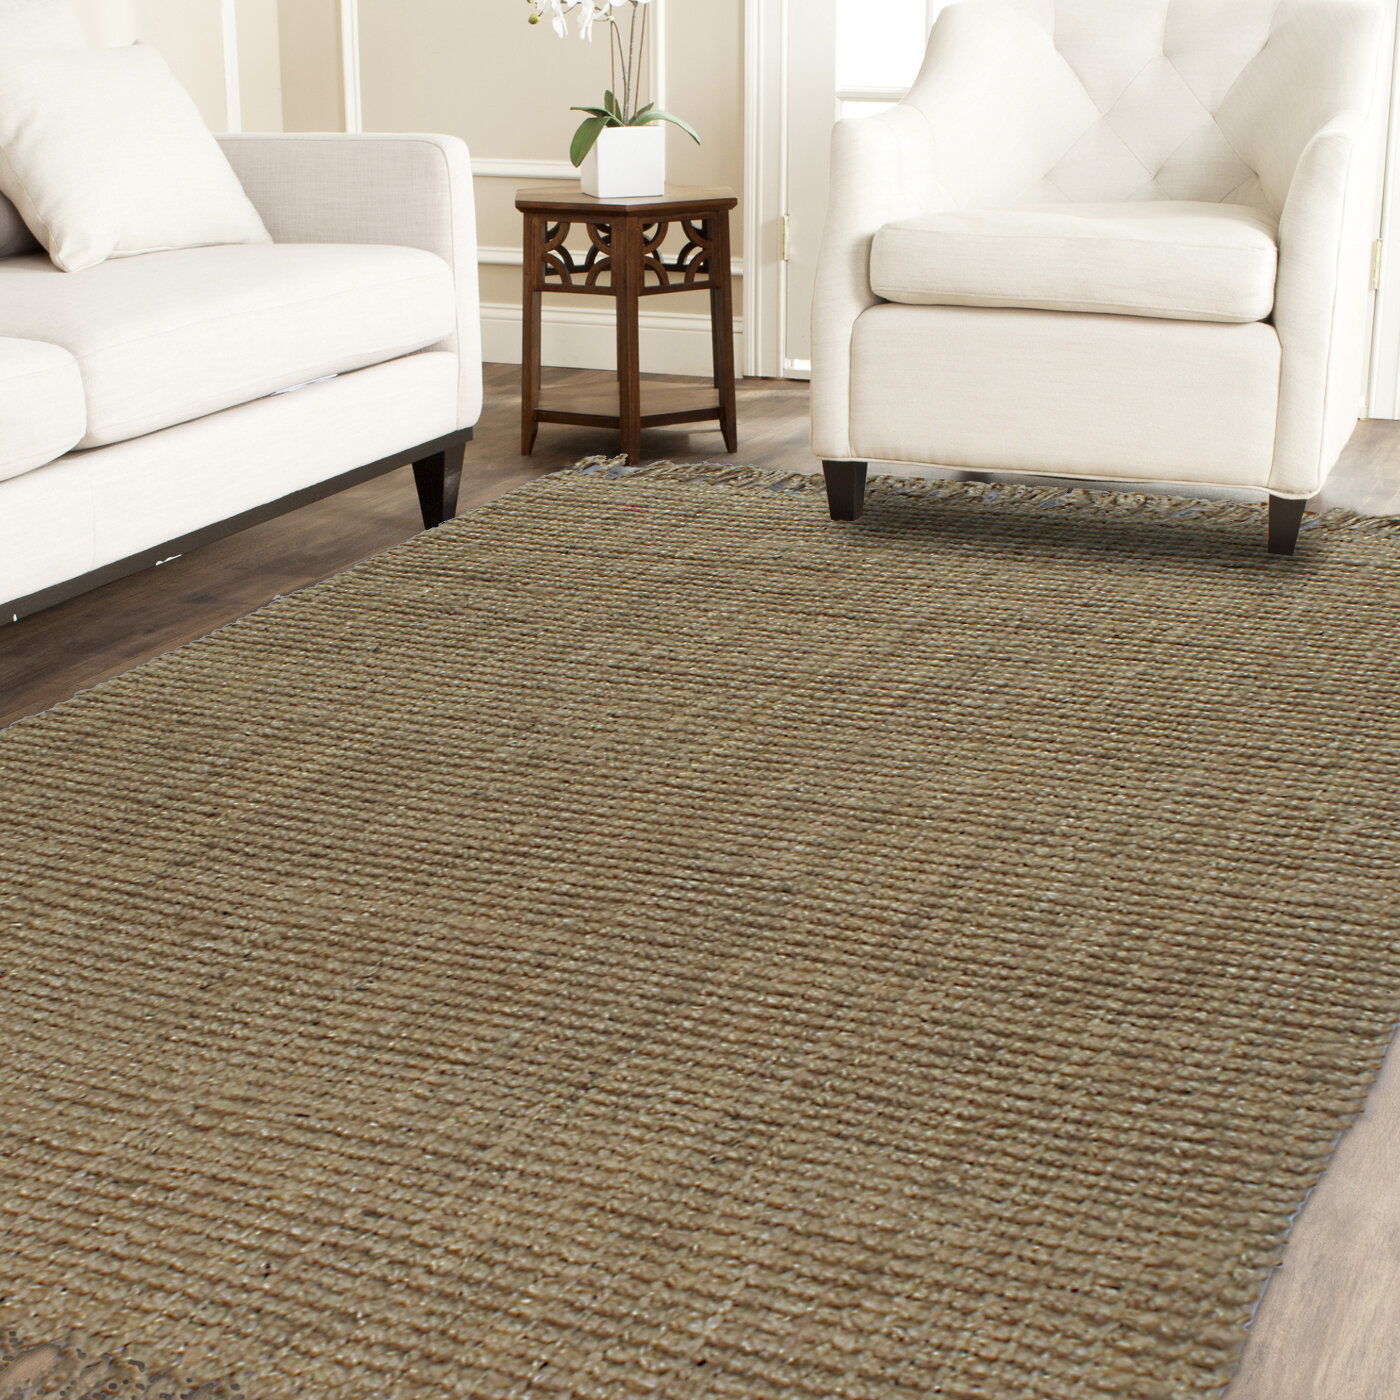 A1 Home Collections LLC Hand Knotted Jute/Sisal Solid Color Rug